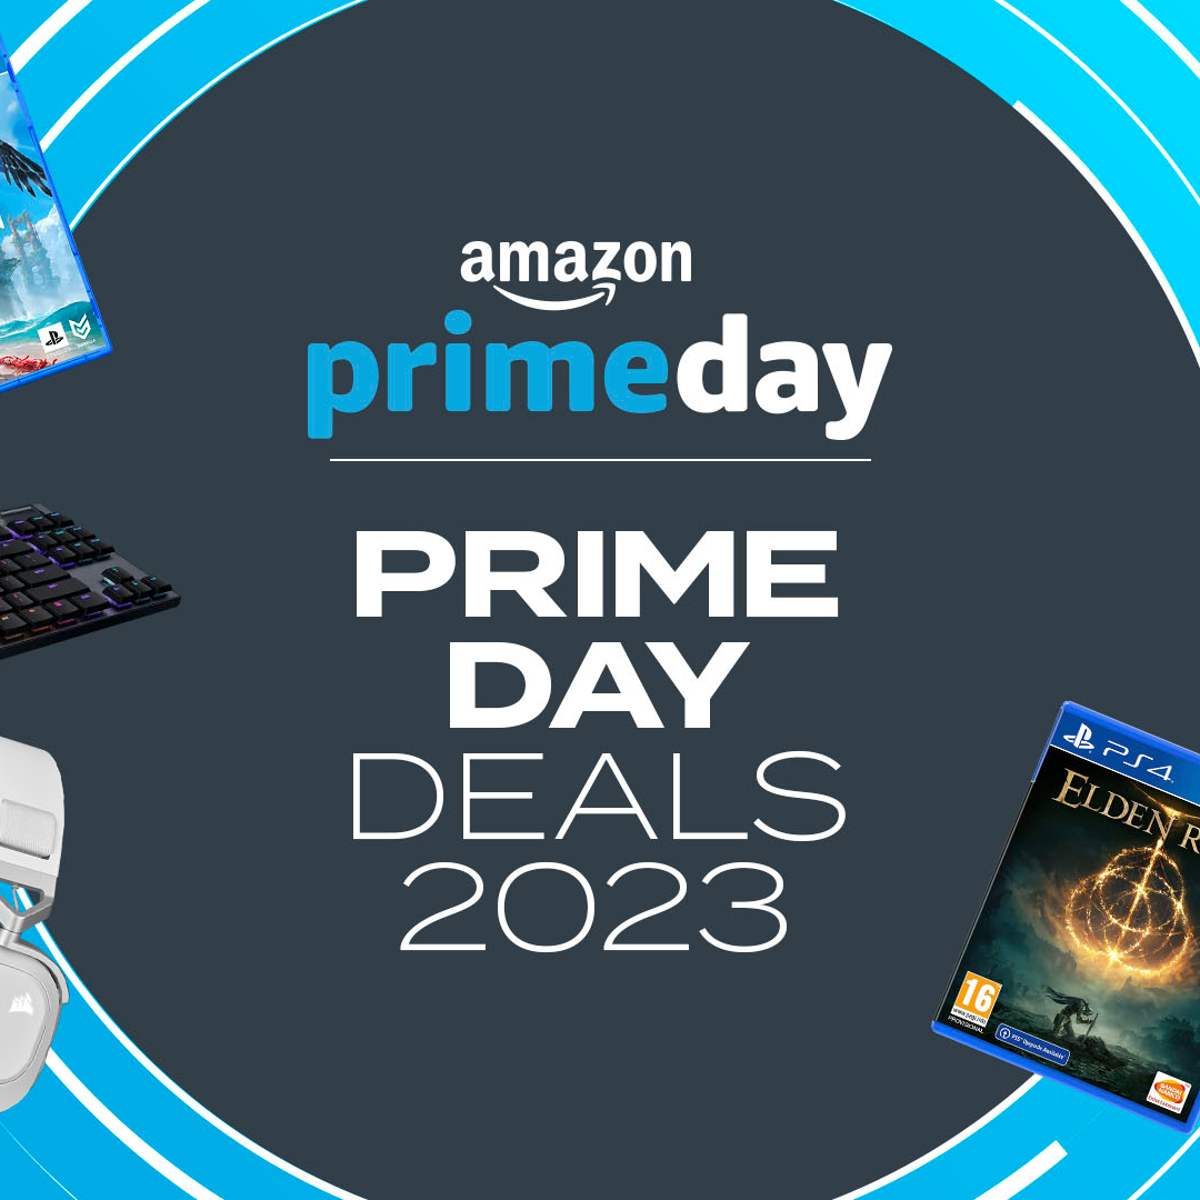 https://assetsio.reedpopcdn.com/Jelly_Deals_Prime-Day_Live_2023_AW.jpg?width=1200&height=1200&fit=crop&quality=100&format=png&enable=upscale&auto=webp